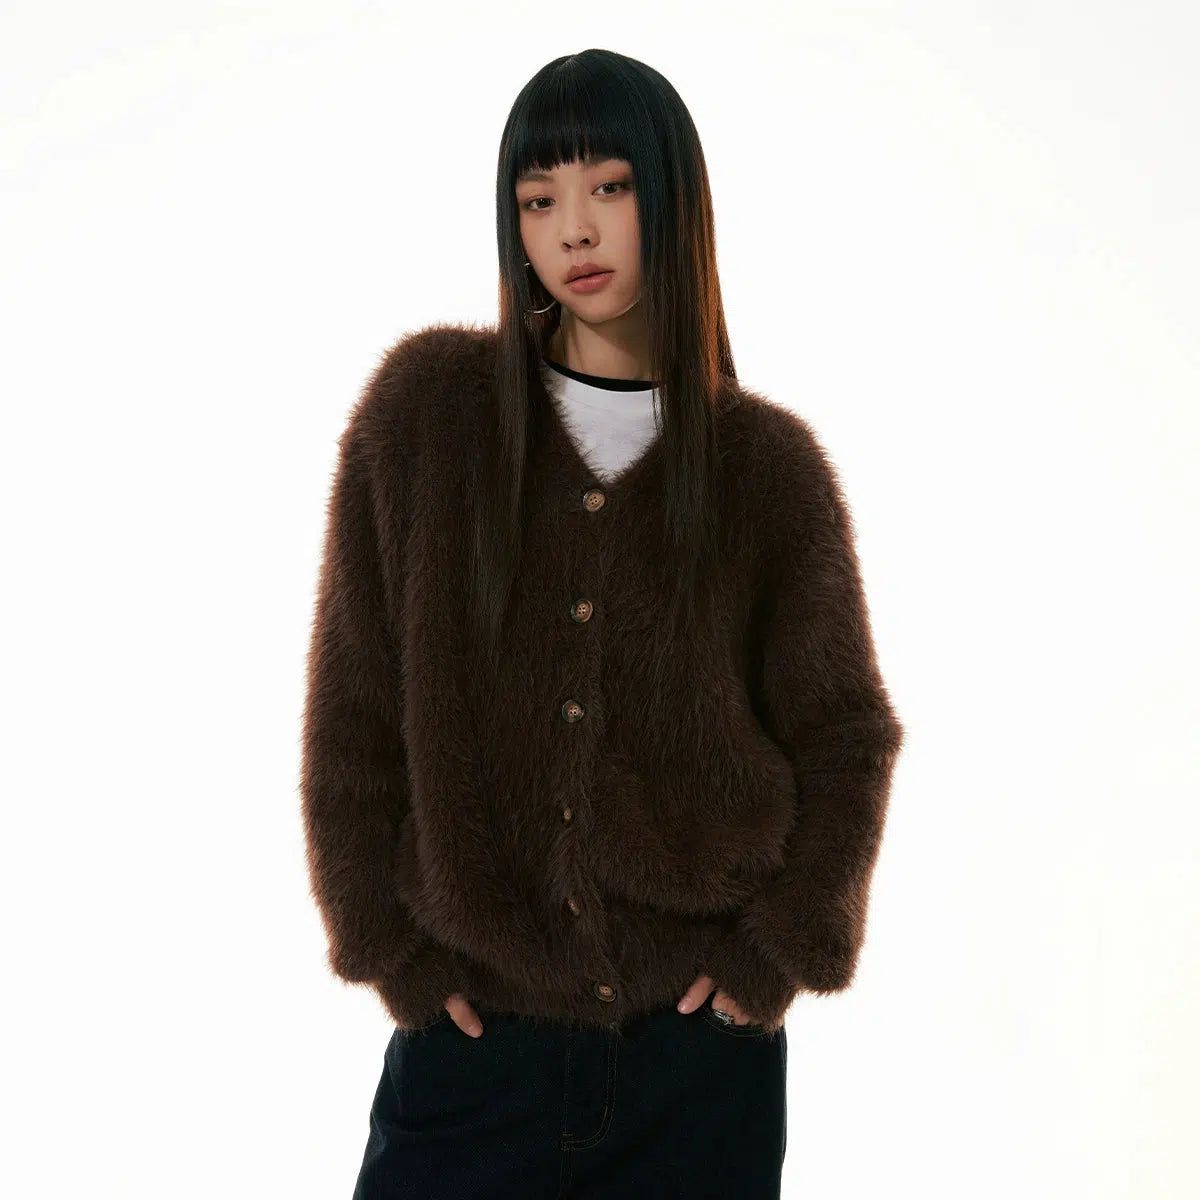 Faux Fur Buttoned Sweater Korean Street Fashion Sweater By Funky Fun Shop Online at OH Vault